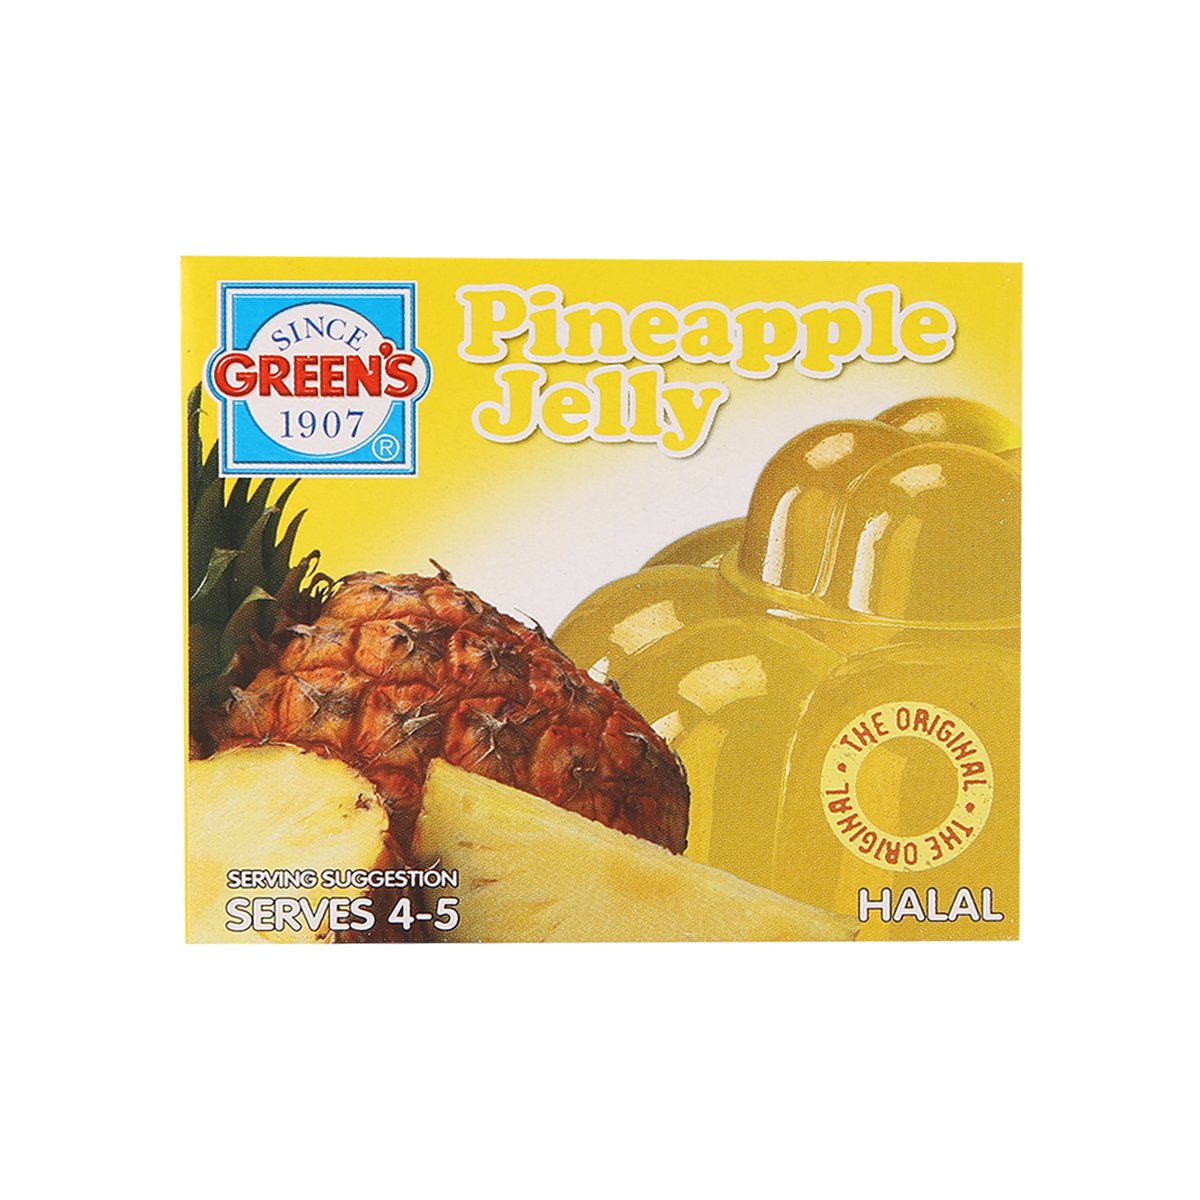 Green's Pineapple Jelly 12 x 80 g